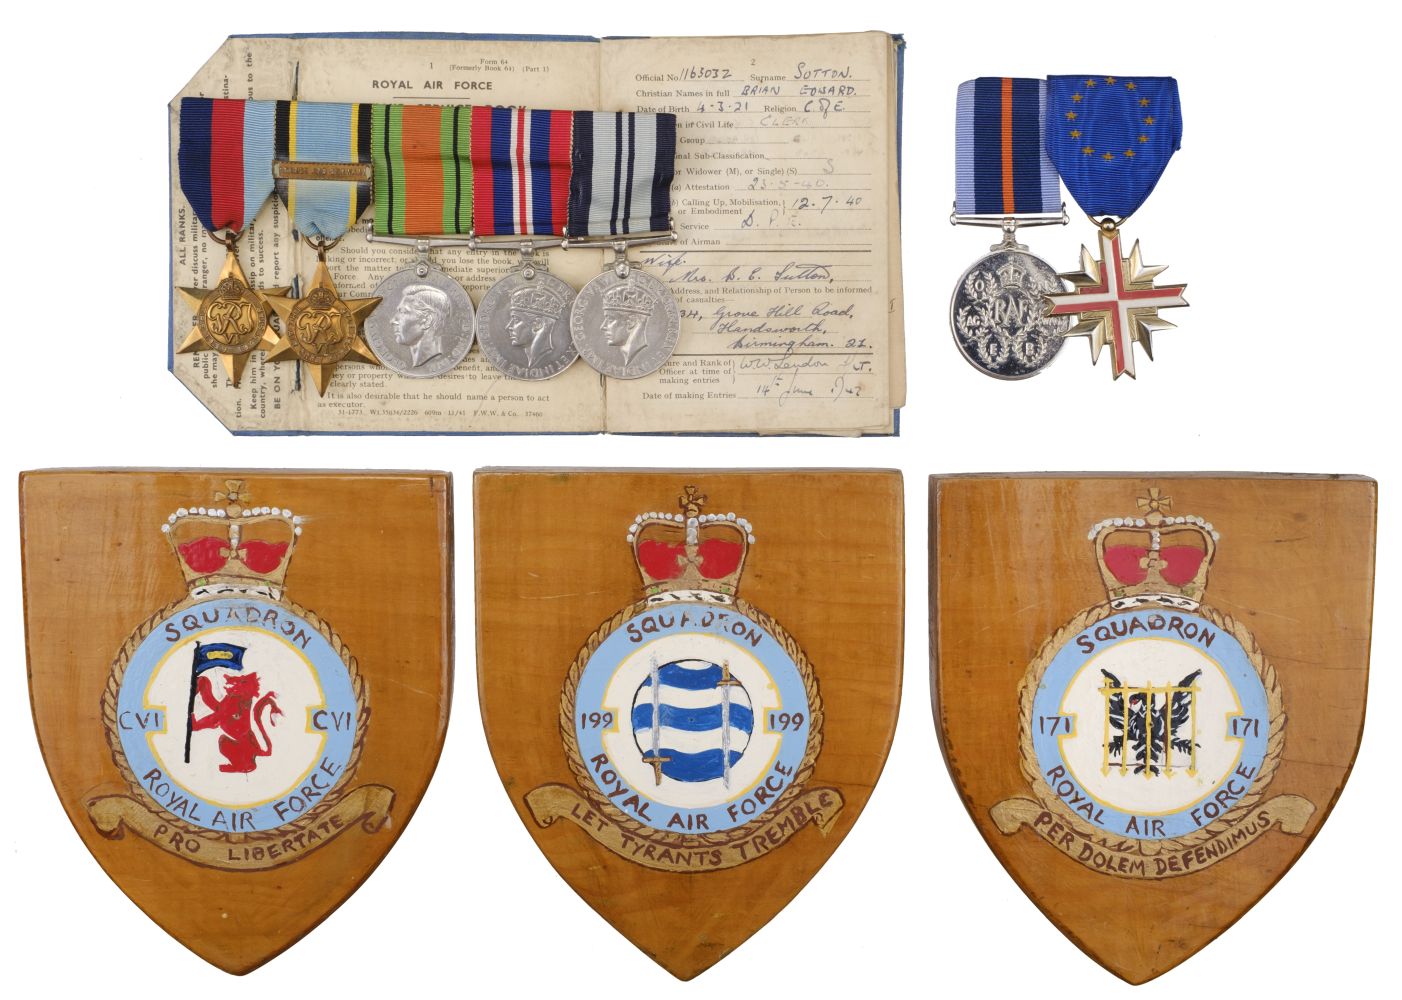 WWII RAF Medals. Warrant Officer Brian Sutton, 106 Squadron, Royal Air Force